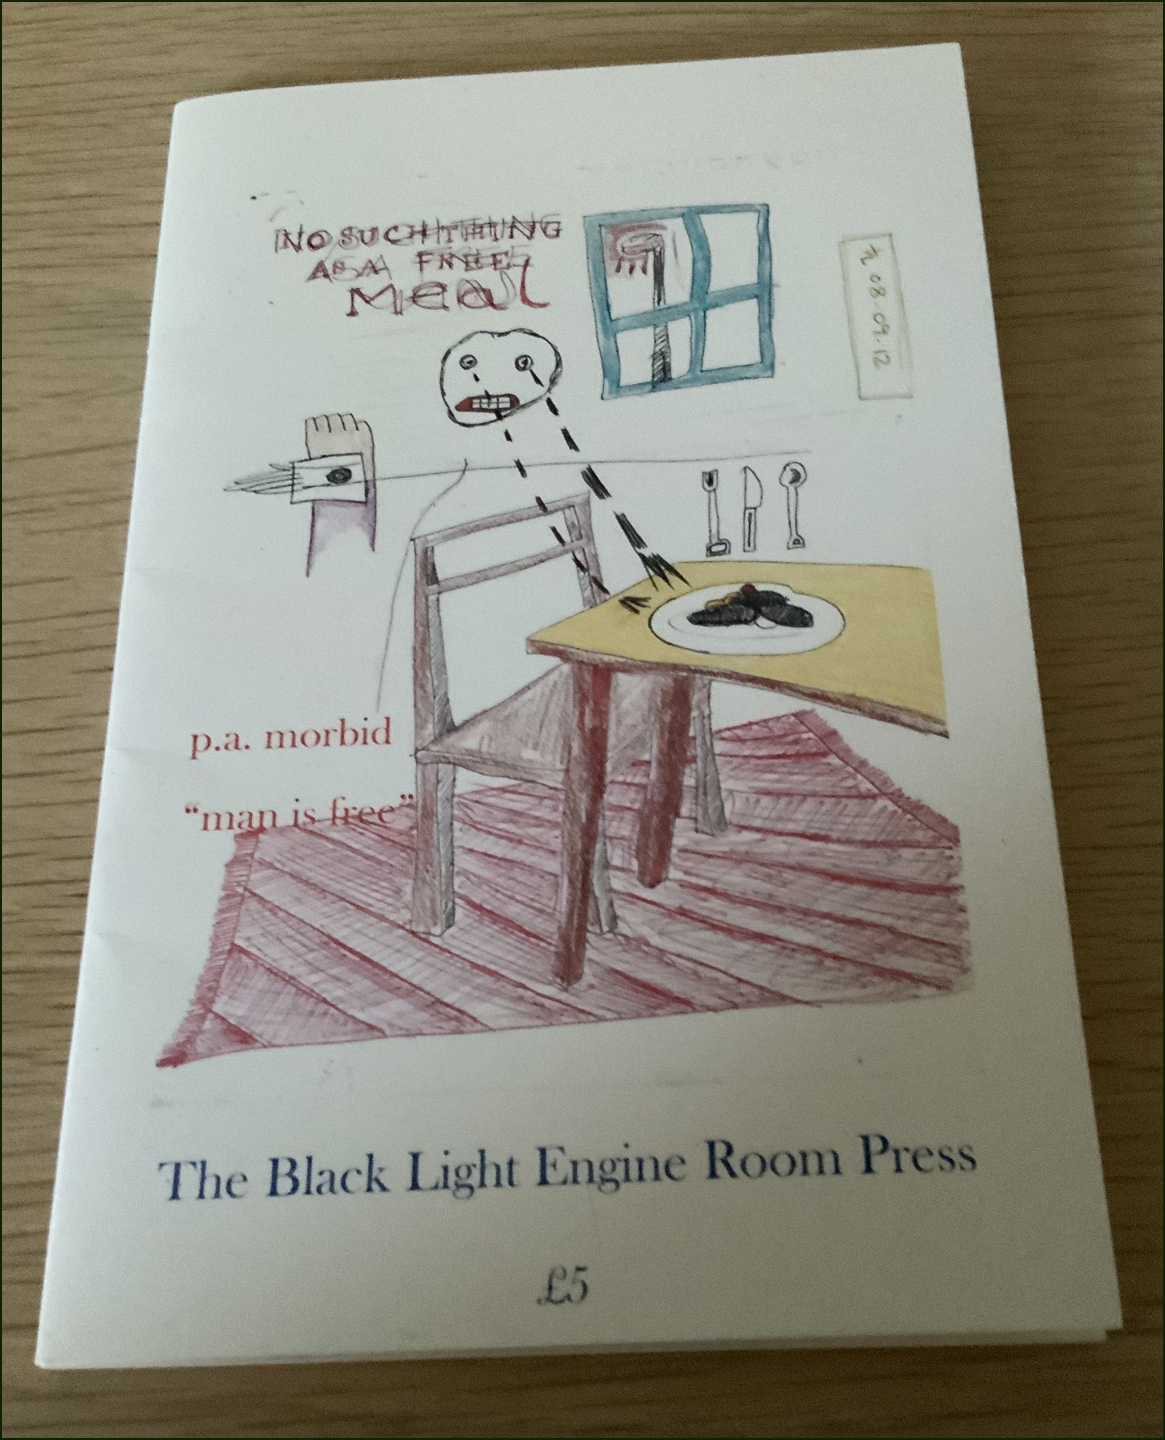 This is a photo of the pamphlet lying on a wooden surface. The jacket is white and most of it's taken up with a colour drawing done roughly, like a doodle really. It's a cartoon. It is a rough drawing of a room with table, chair and window. There's a meal on the table (maybe sausages on the plate), and the cutlery standing up vertically. There is a face with clenched teeth and tears dropping onto the table like two lines of black hyphens. Words above the head in scribbly unclear caps say: THERE'S NO SUCH THING AS A FREE MEAL. The author's name in pink lower case (same colour as the carpet) appears in the middle of the jacket left-justified, with the pamphlet title just below. An inch from the bottom on bold lower case is the title of the press: The Black Light Engine Room Press.